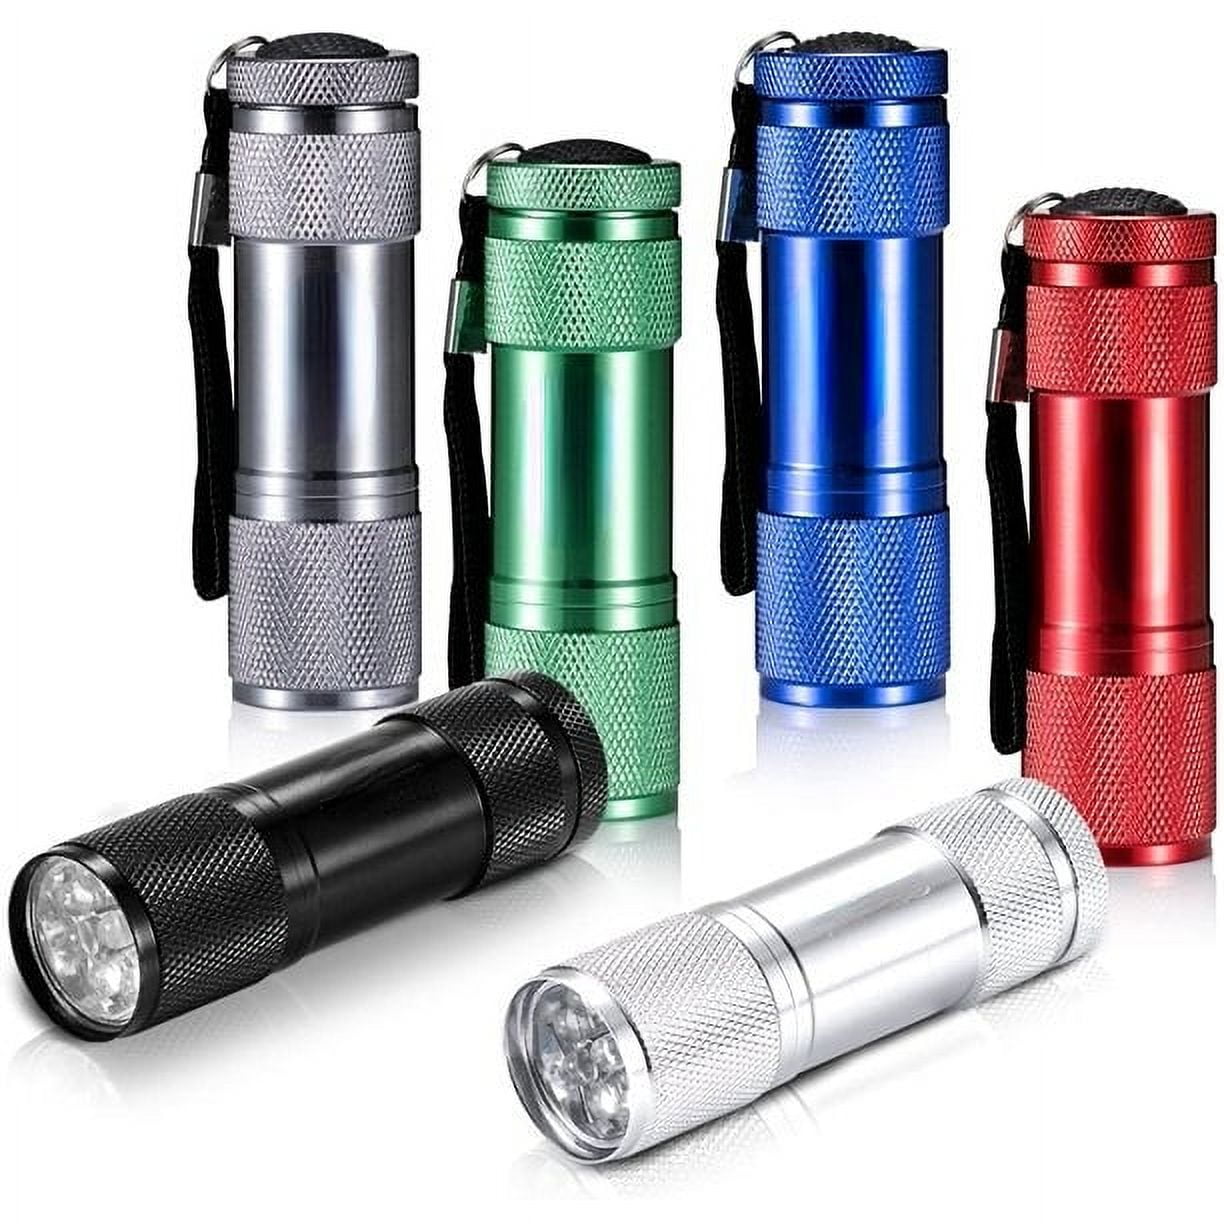 EverBrite 9-LED Flashlight 6-Pack Compact Handheld Torch Assorted Colors  with Lanyard 3AAA Battery Included (Hurricane Supplies, Camping) White Light